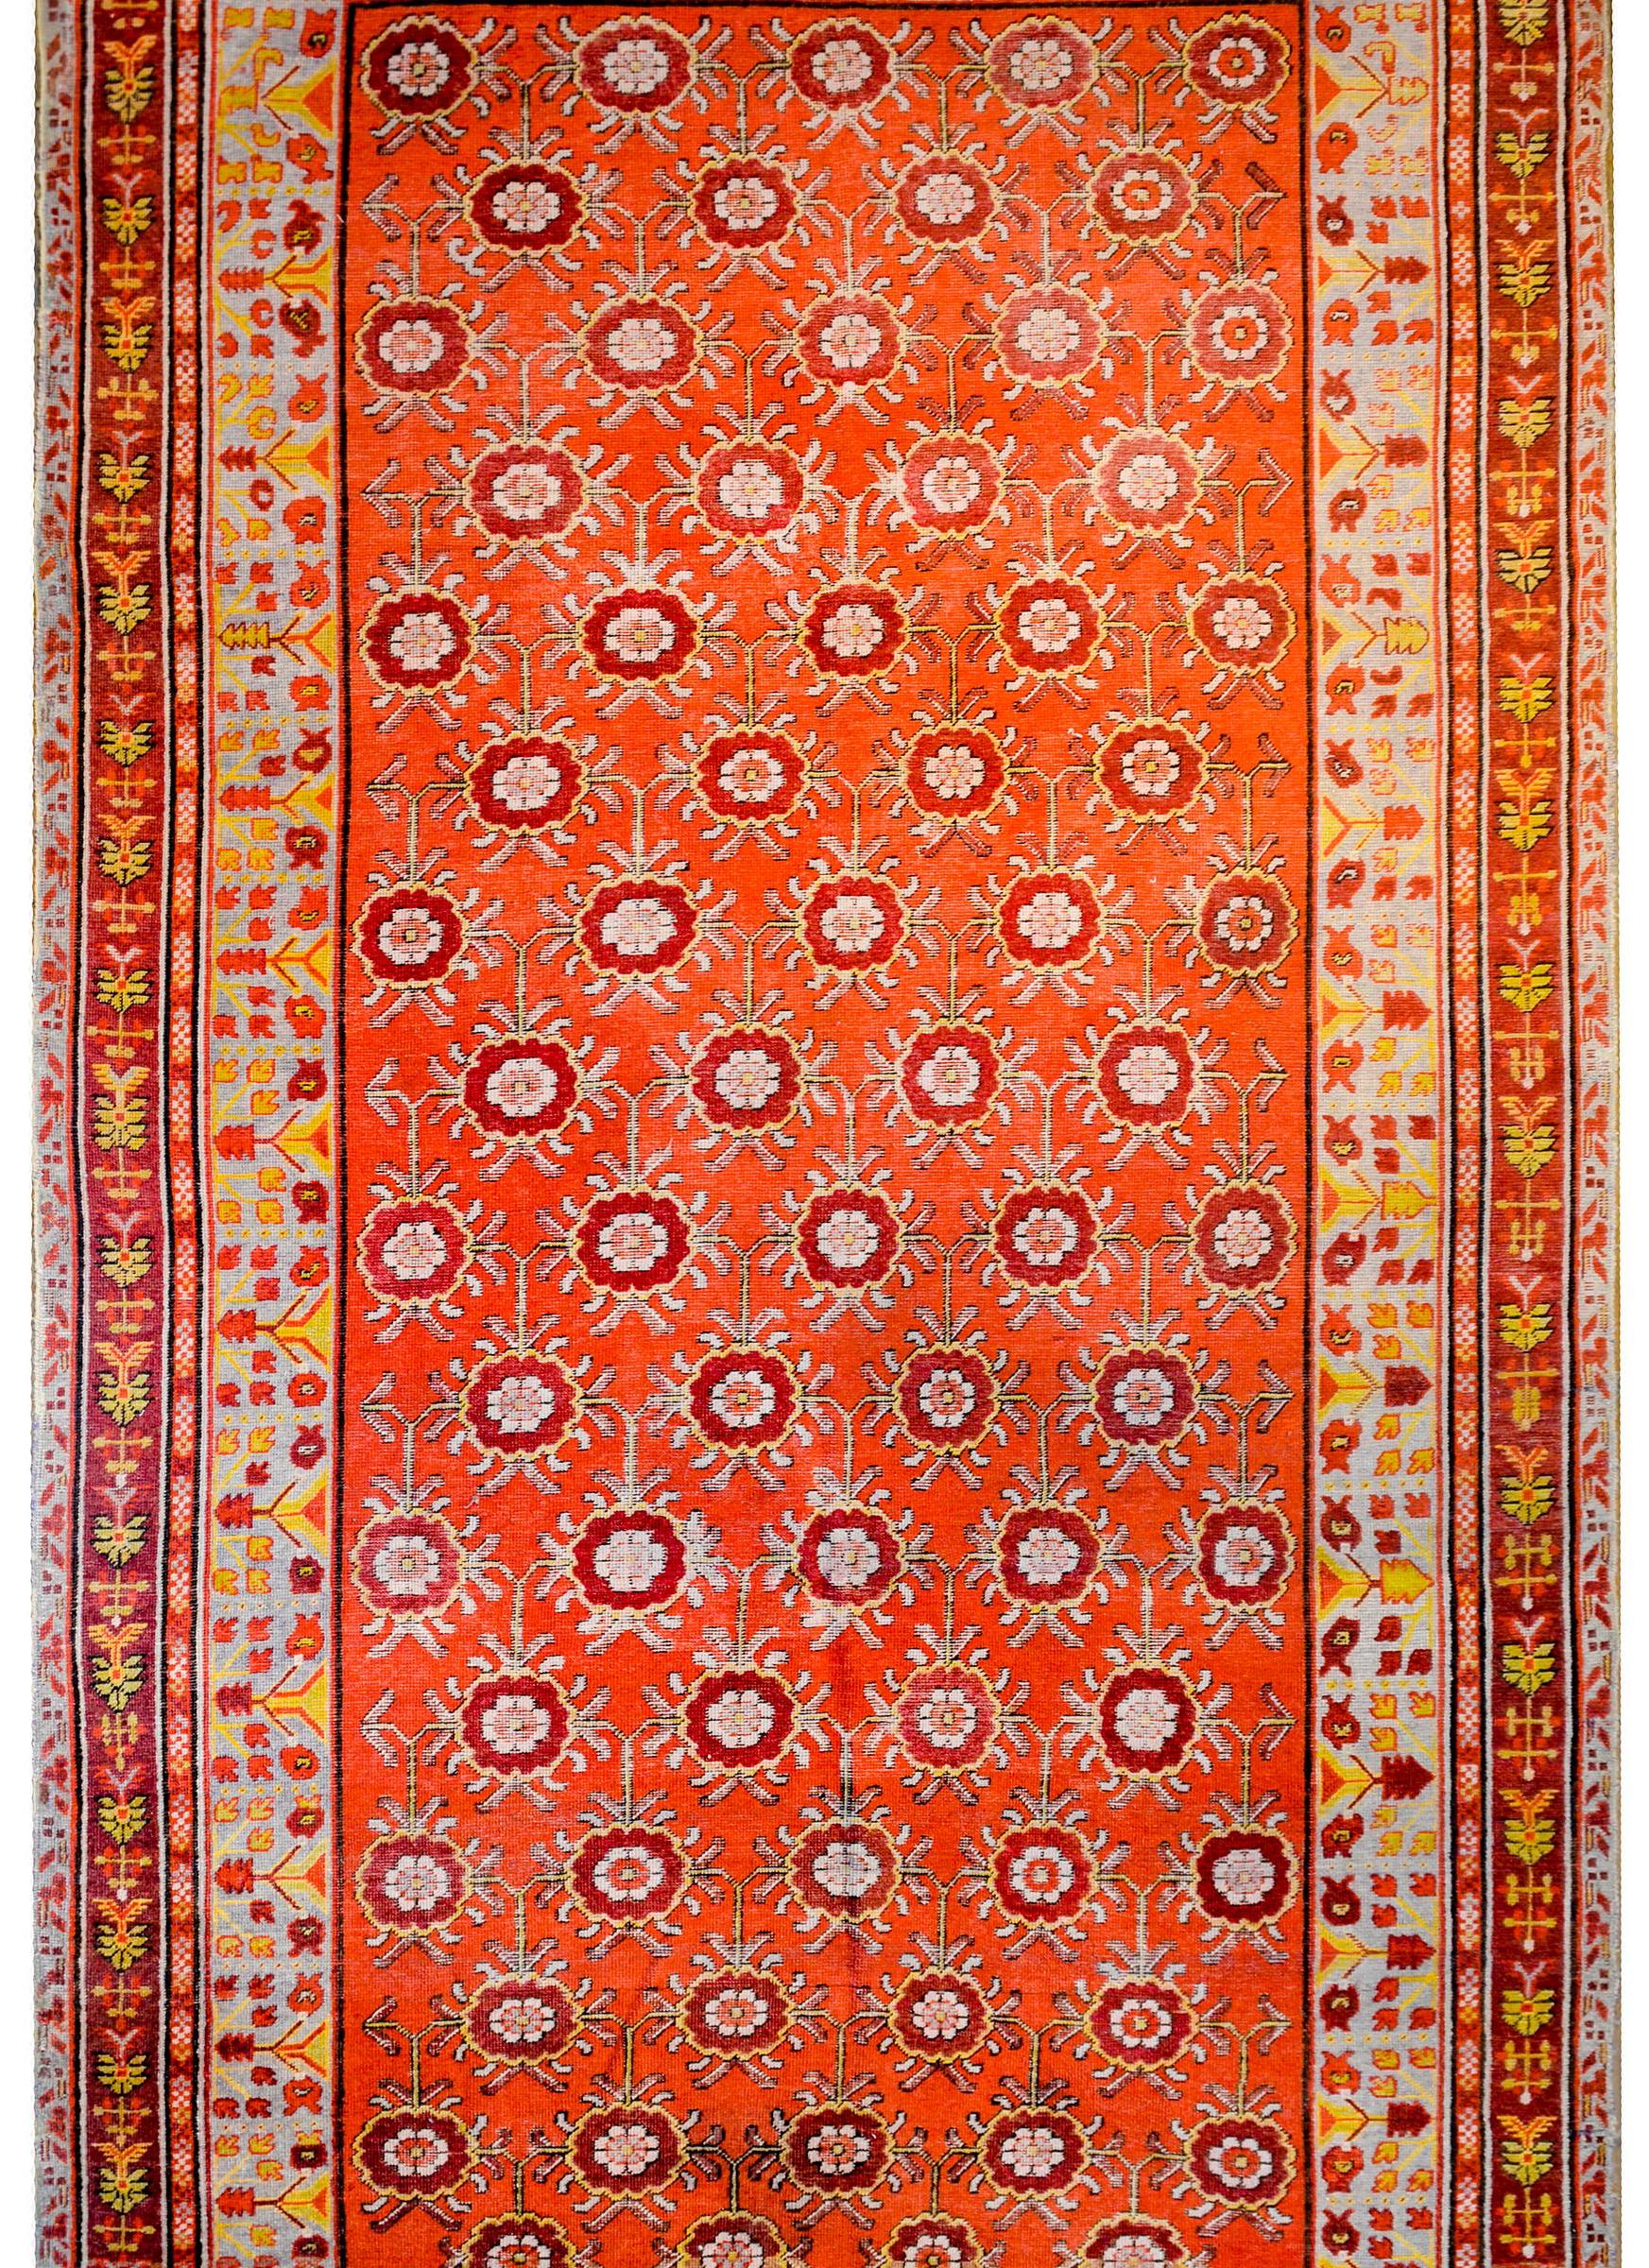 An extraordinary early 20th century Central Asian Samarghand rug with an incredible all-over large scale trellis peony pattern woven in dark cranberry and gold on a brilliant coral colored ground. The border is complex with multiple floral patterned